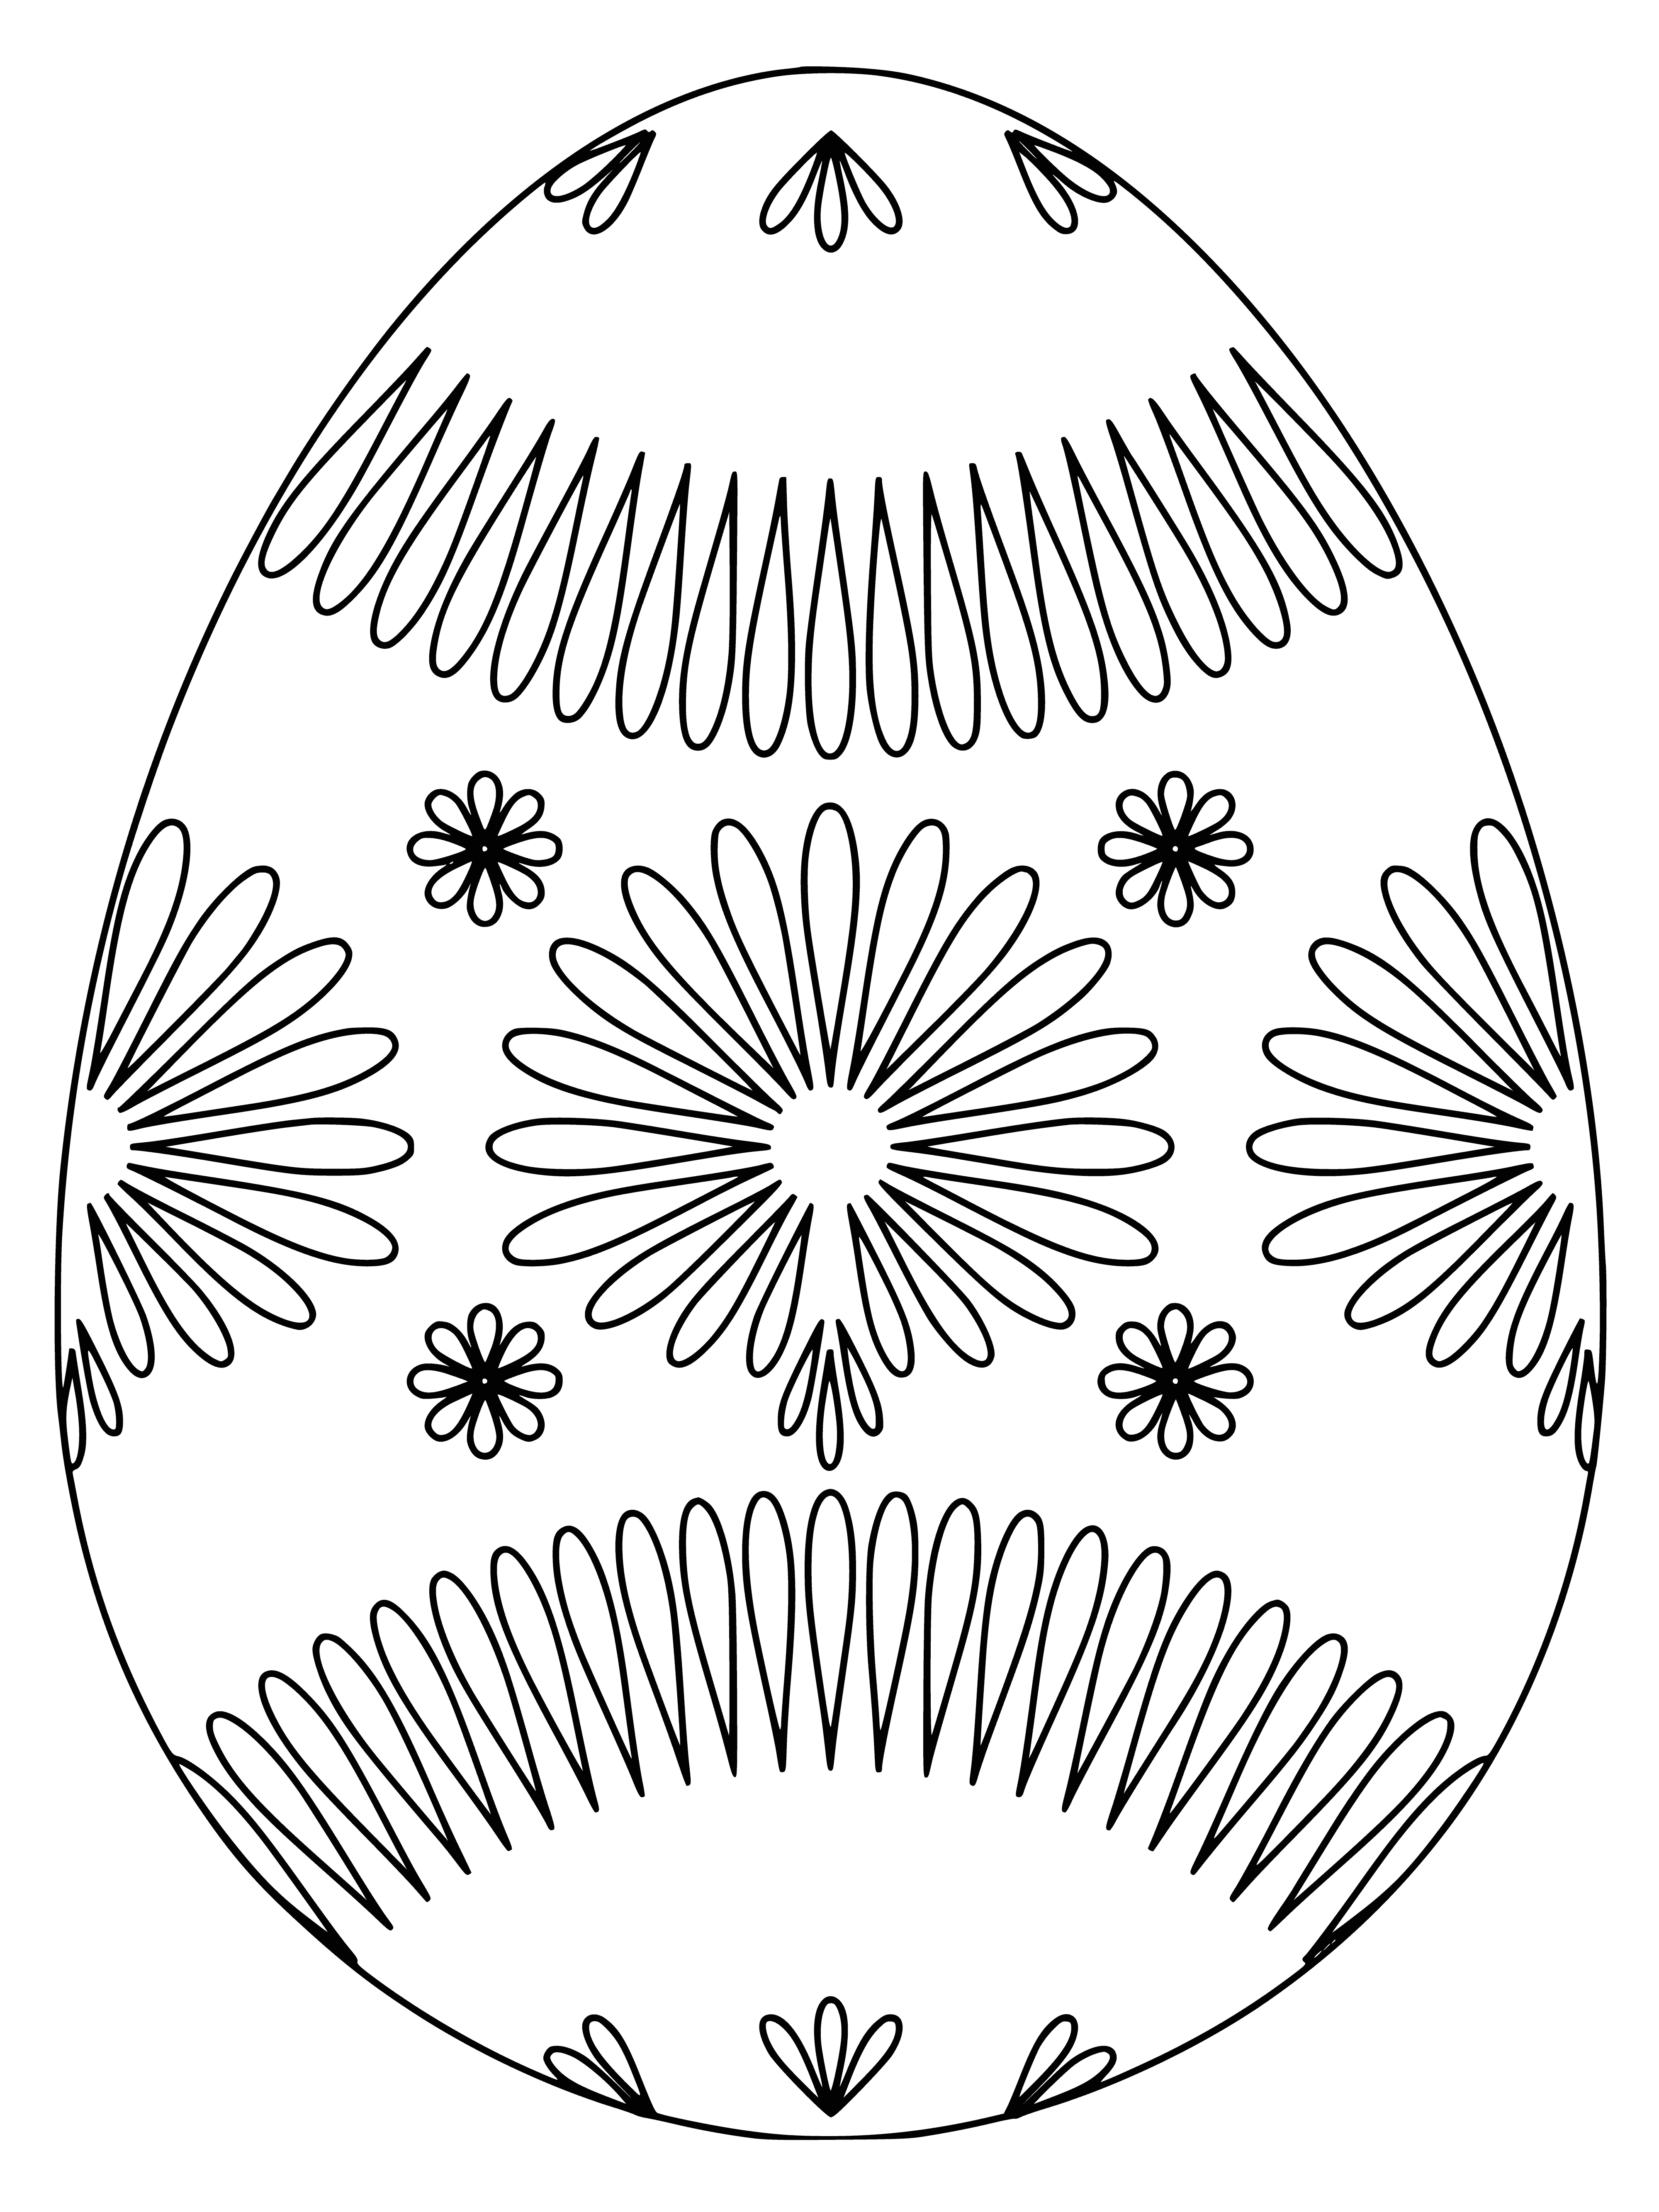 coloring page: #EasterEggHunt